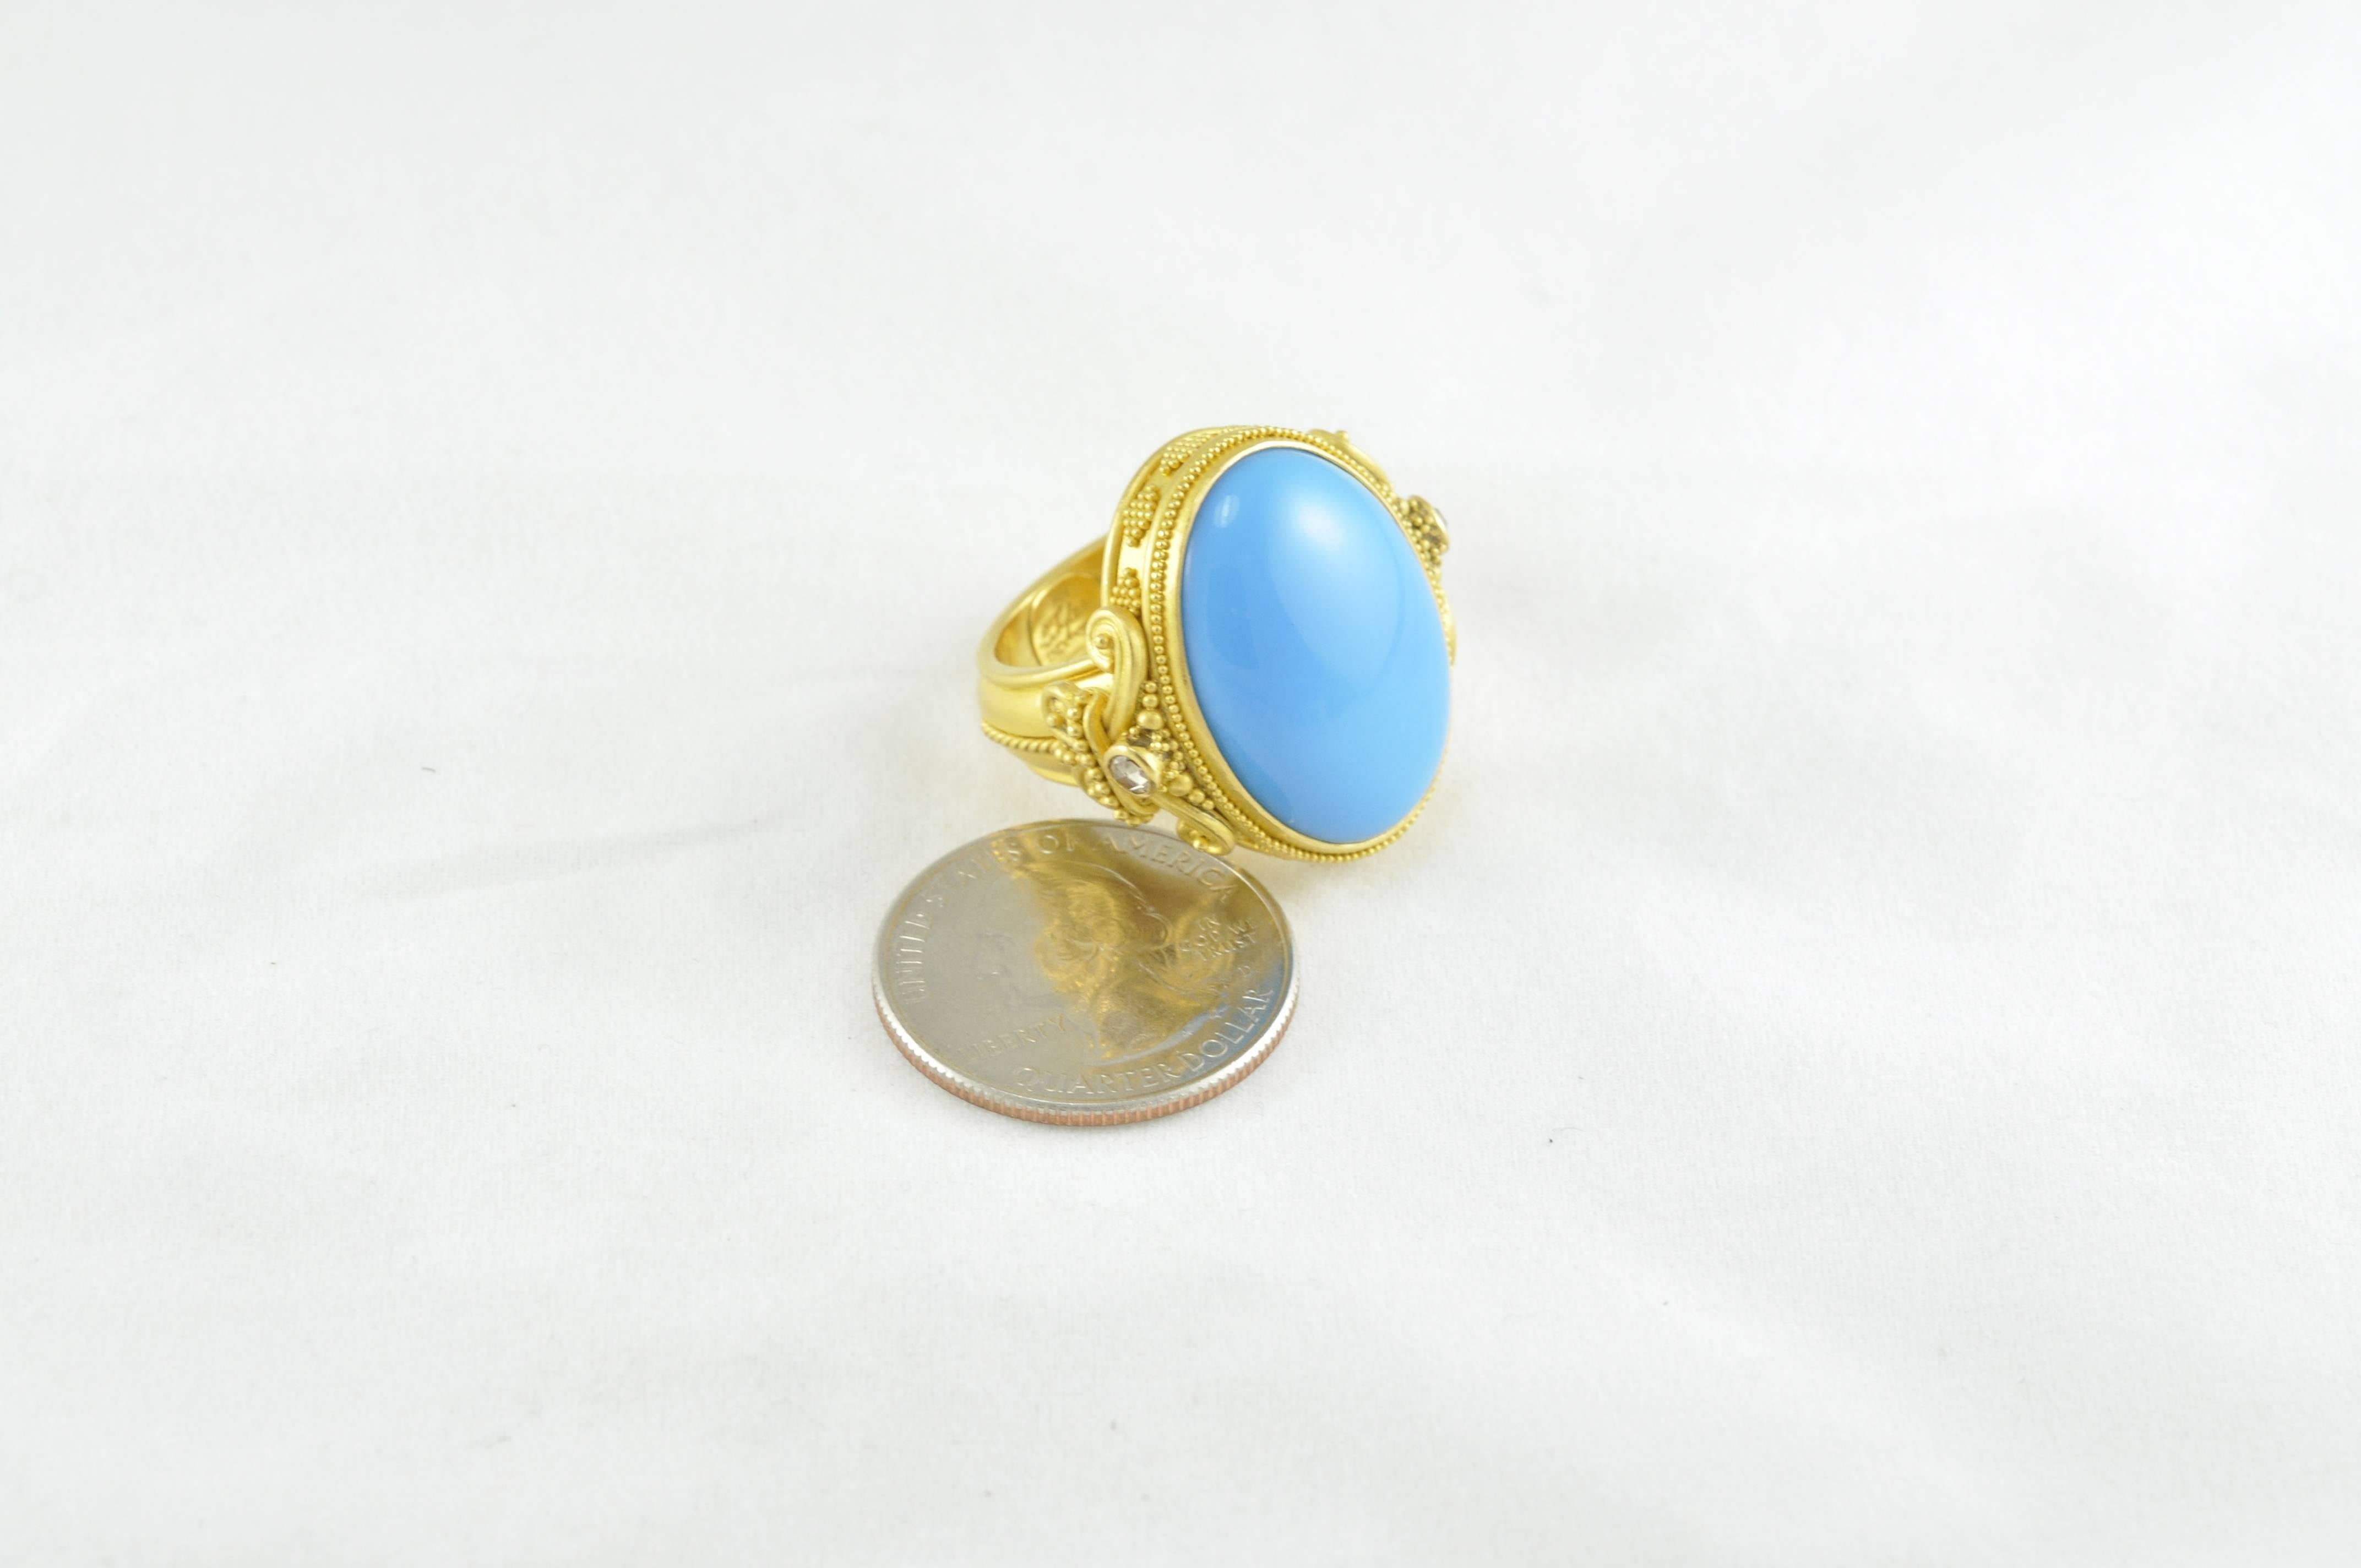 Fleur De Lys Carolyn Tyler Ring featuring an Extra Fine 20.5ctw Beautiful Cabochon Turquoise Stone from the Sleeping Beauty Mine With Diamonds. 
22K gold and granulation.   
Current Size is 7.5